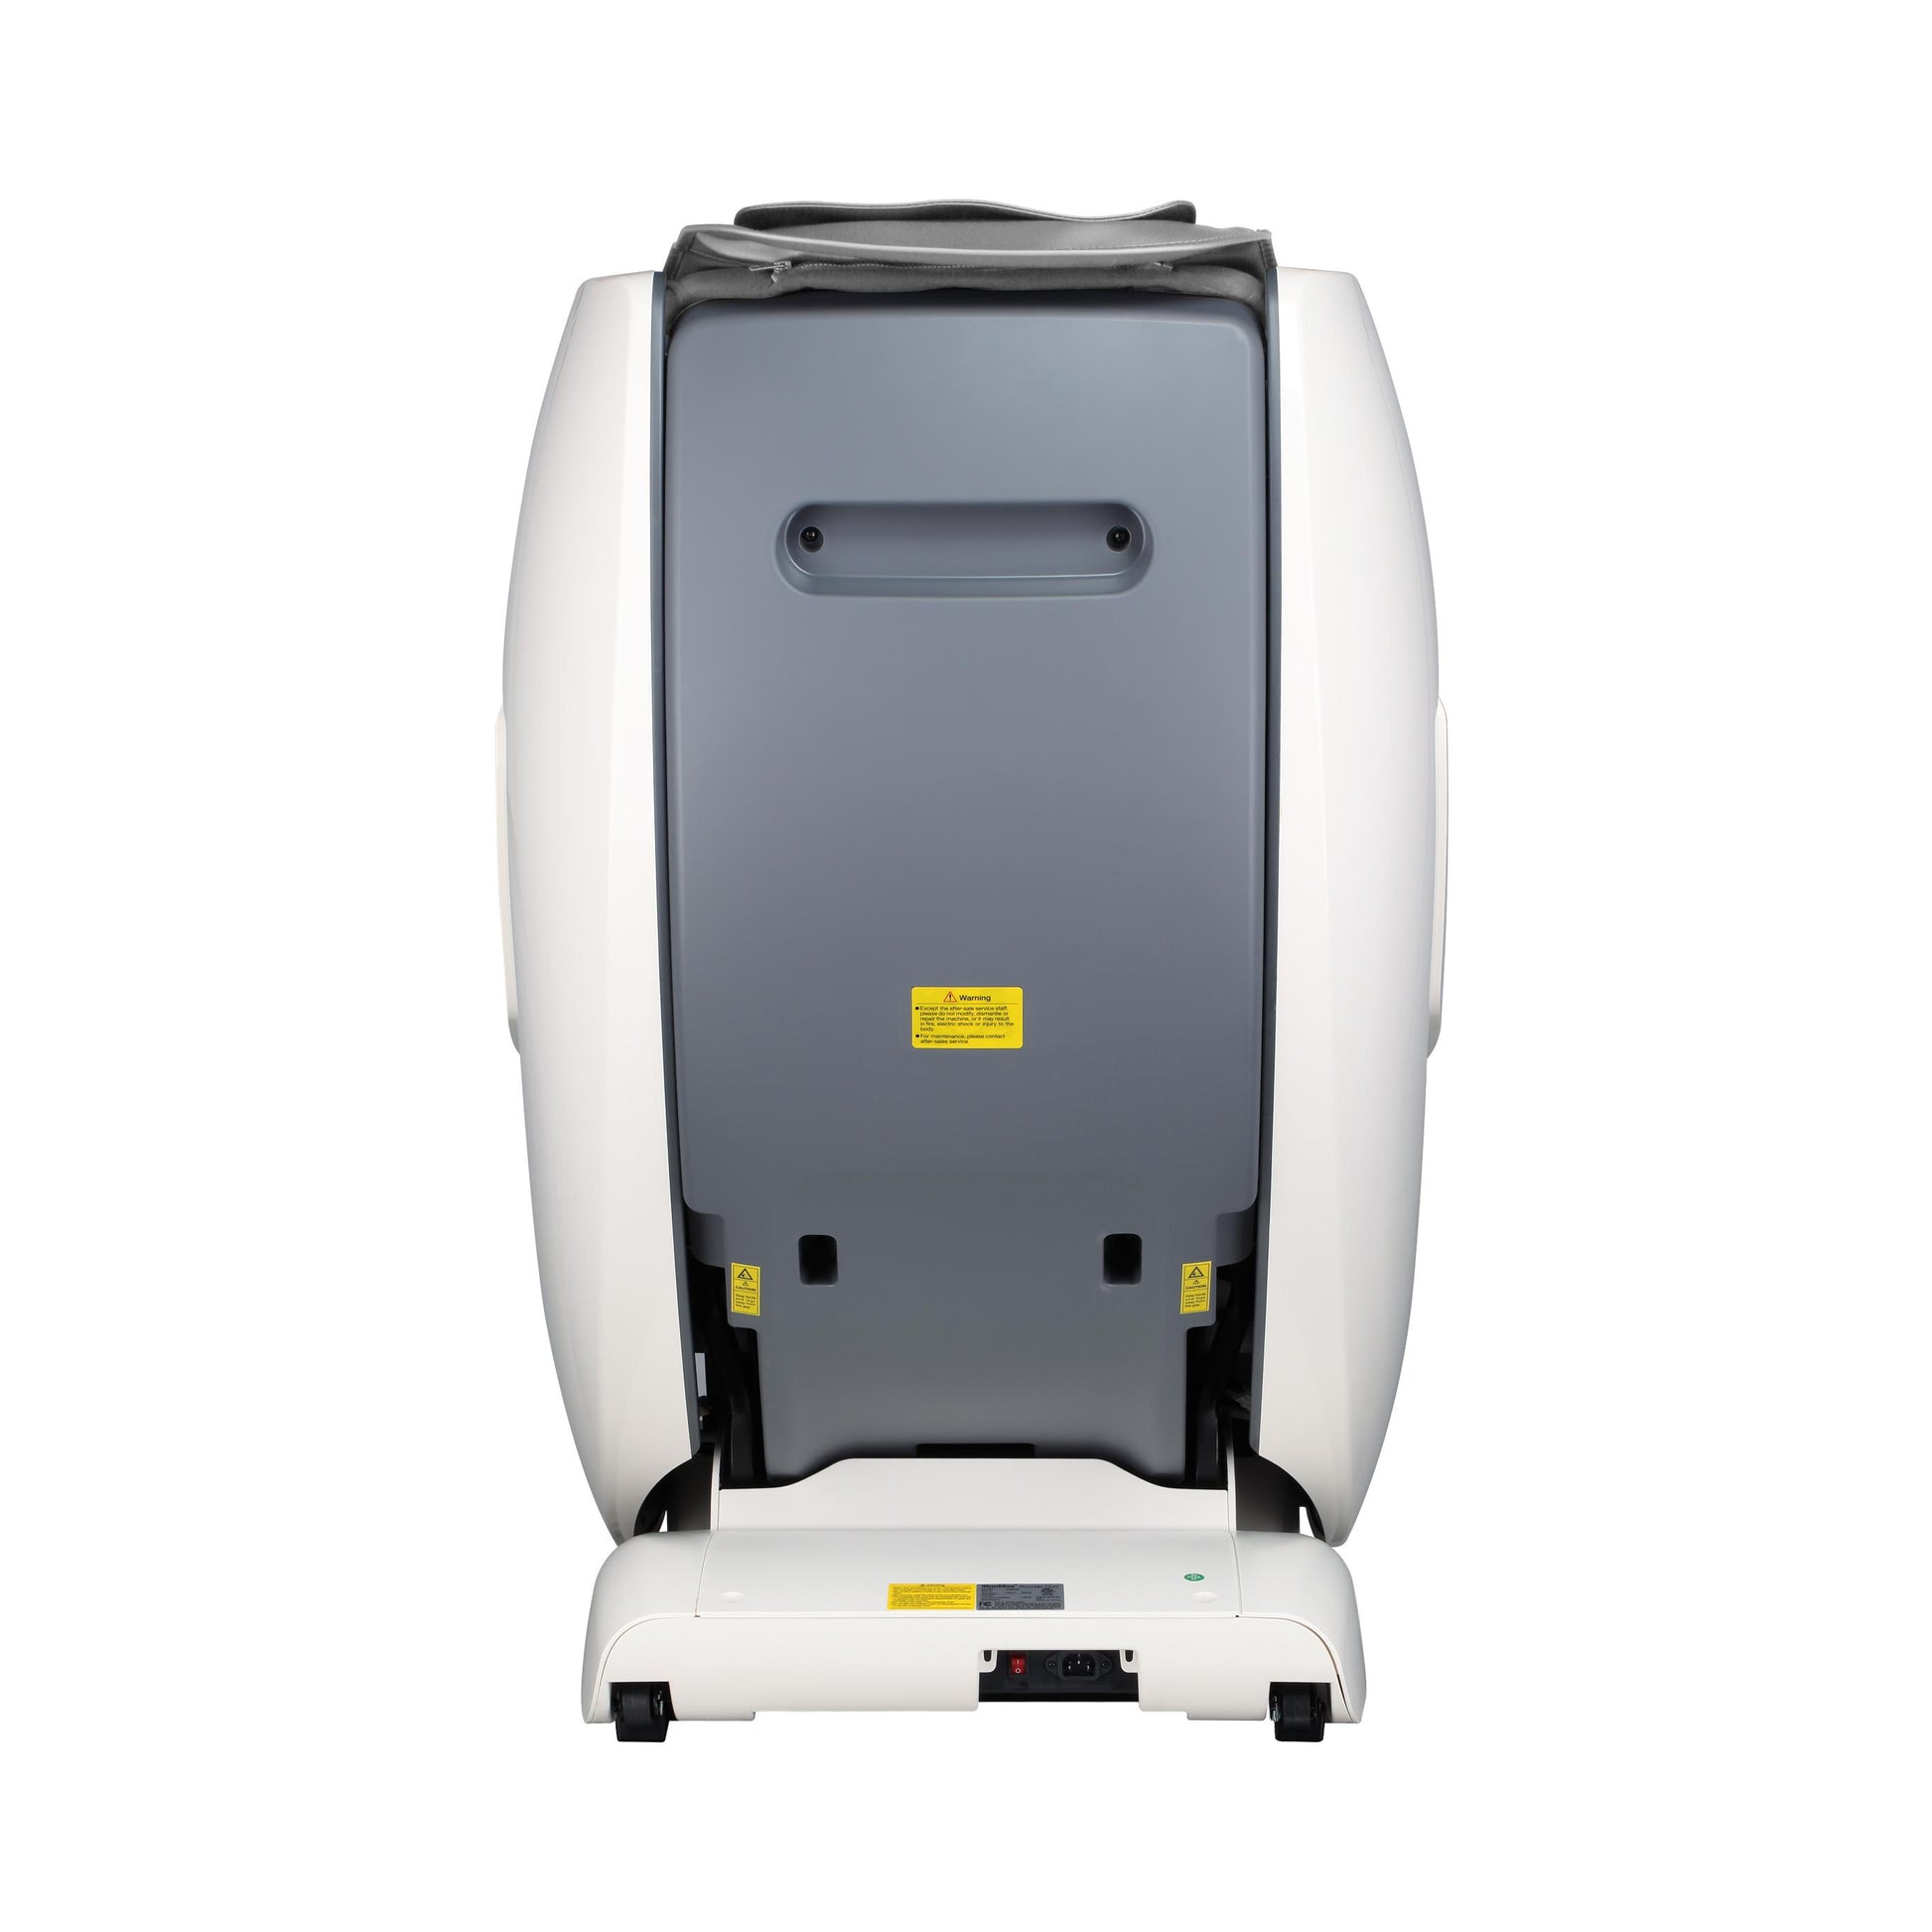 R8606-Grey AI&APP Control Auto-Extend Pedal Zero-G Massage Chair with Gilded Gold Design